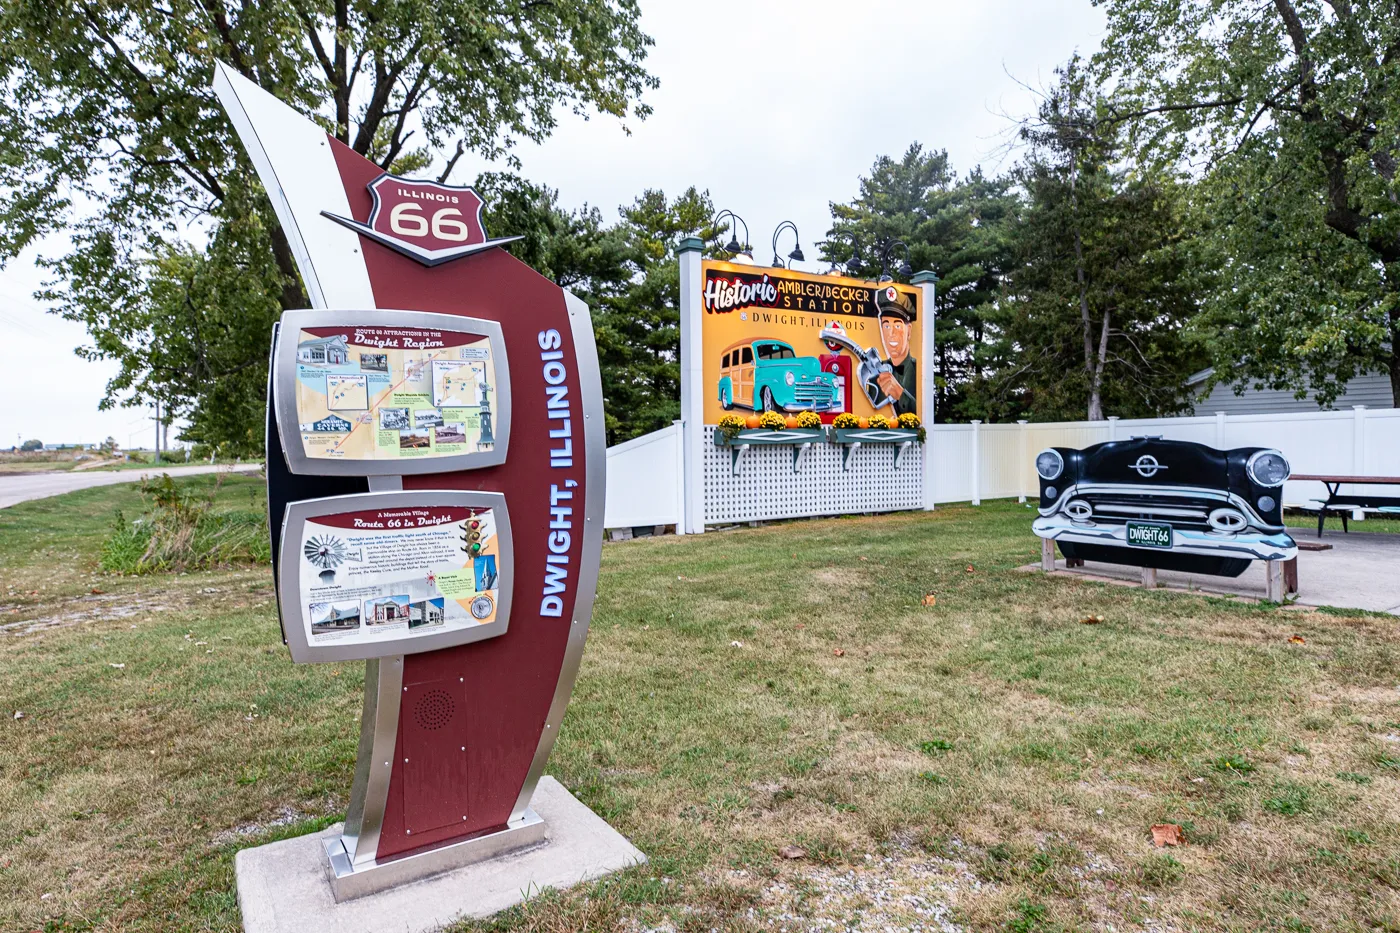 Ambler's Texaco Gas Station in Dwight, Illinois Route 66 Roadside Attraction